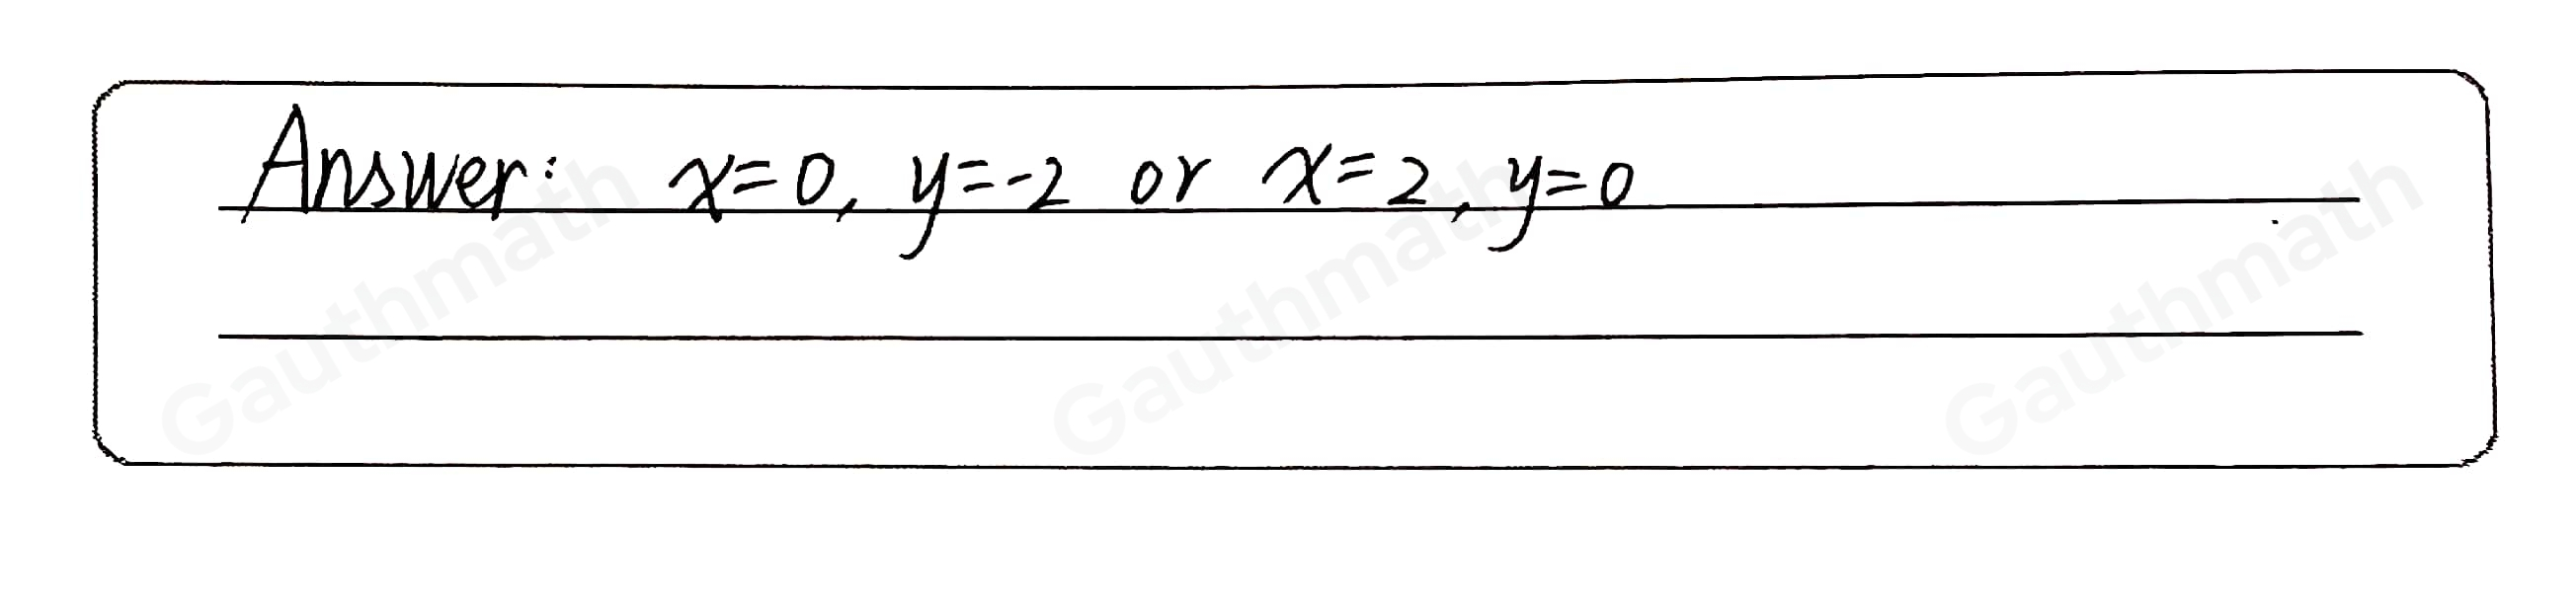 Which represents the solutions of the graphed system of equations, y=x2+x-2 and y=2x-2 ？